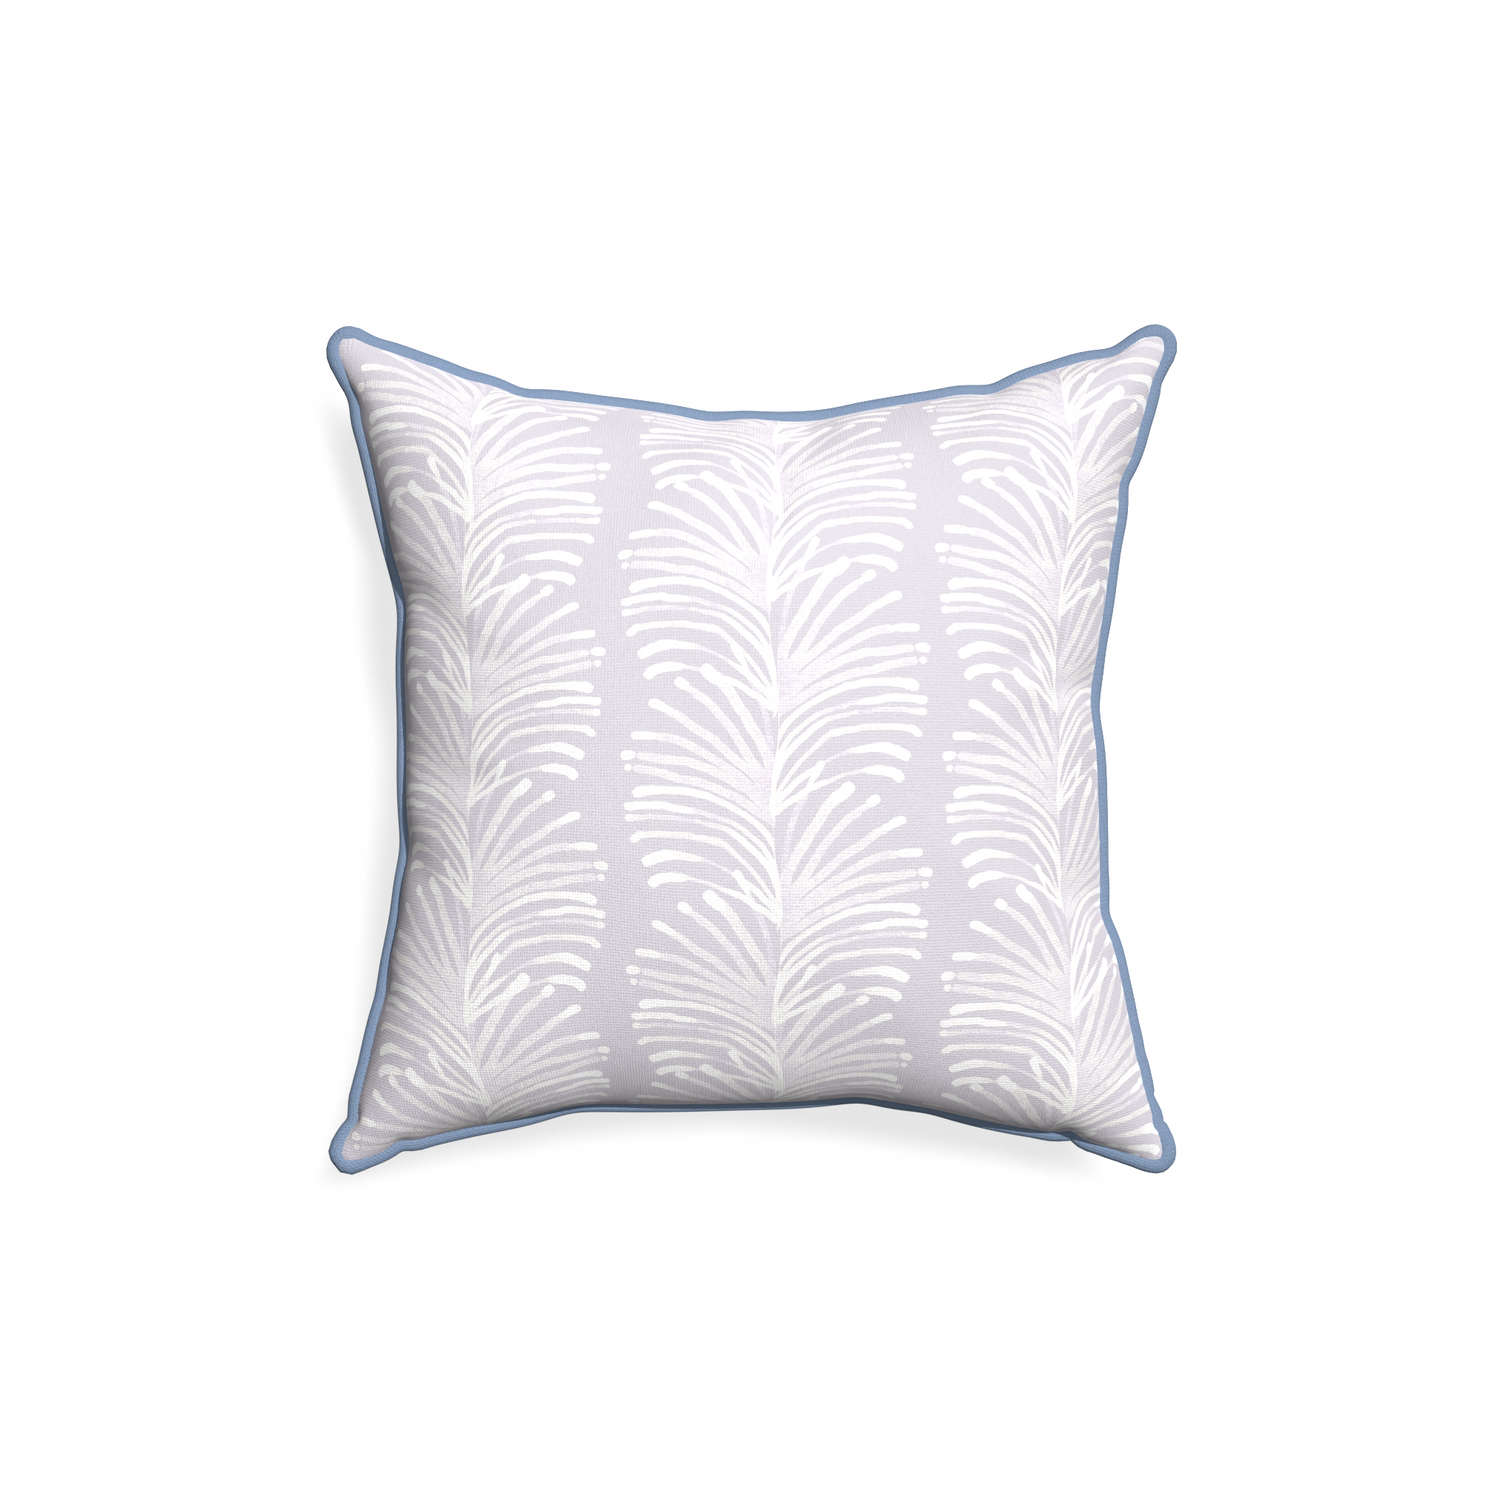 18-square emma lavender custom lavender botanical stripepillow with sky piping on white background